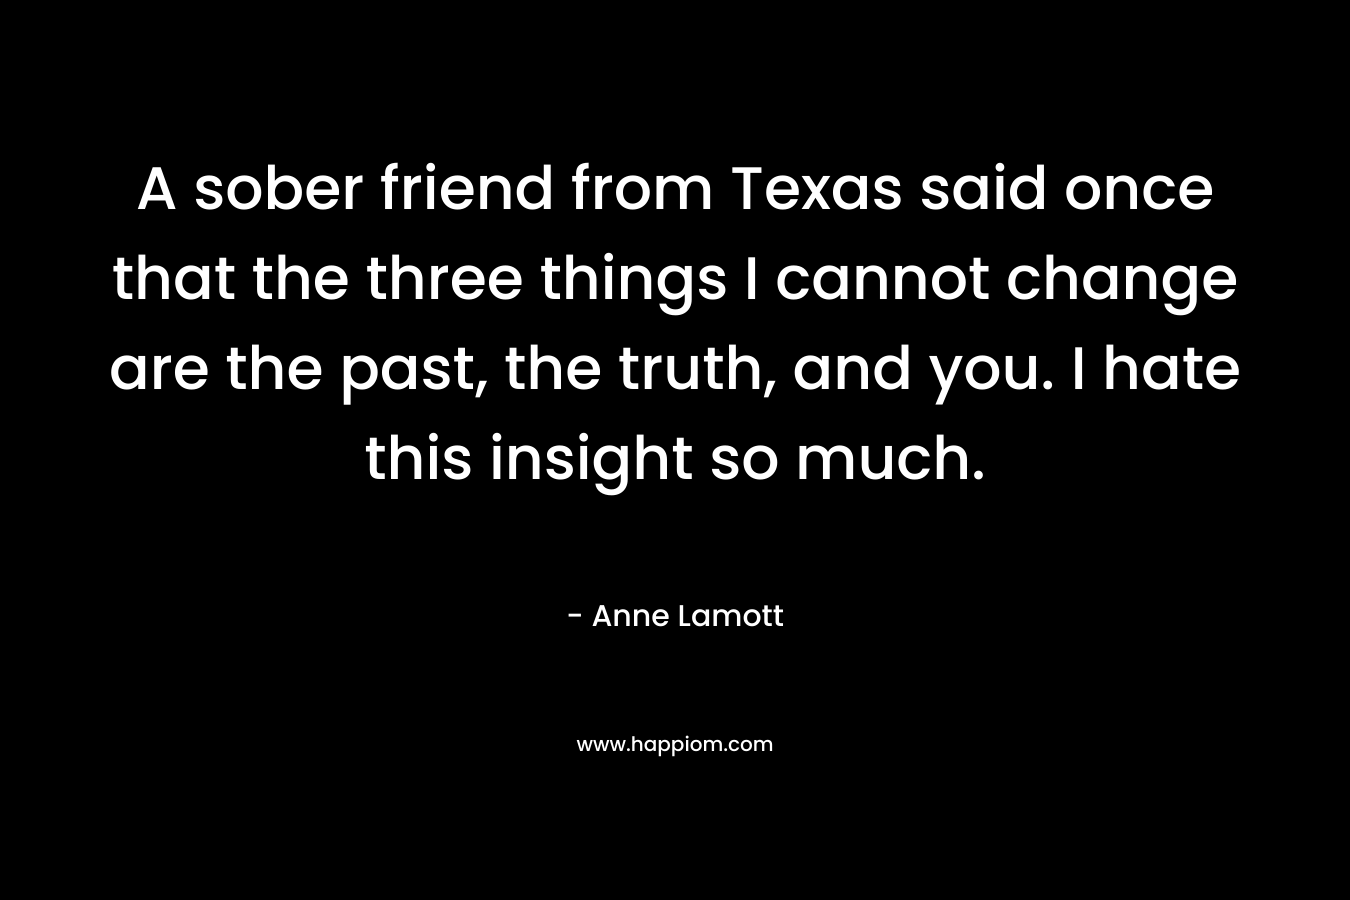 A sober friend from Texas said once that the three things I cannot change are the past, the truth, and you. I hate this insight so much. – Anne Lamott